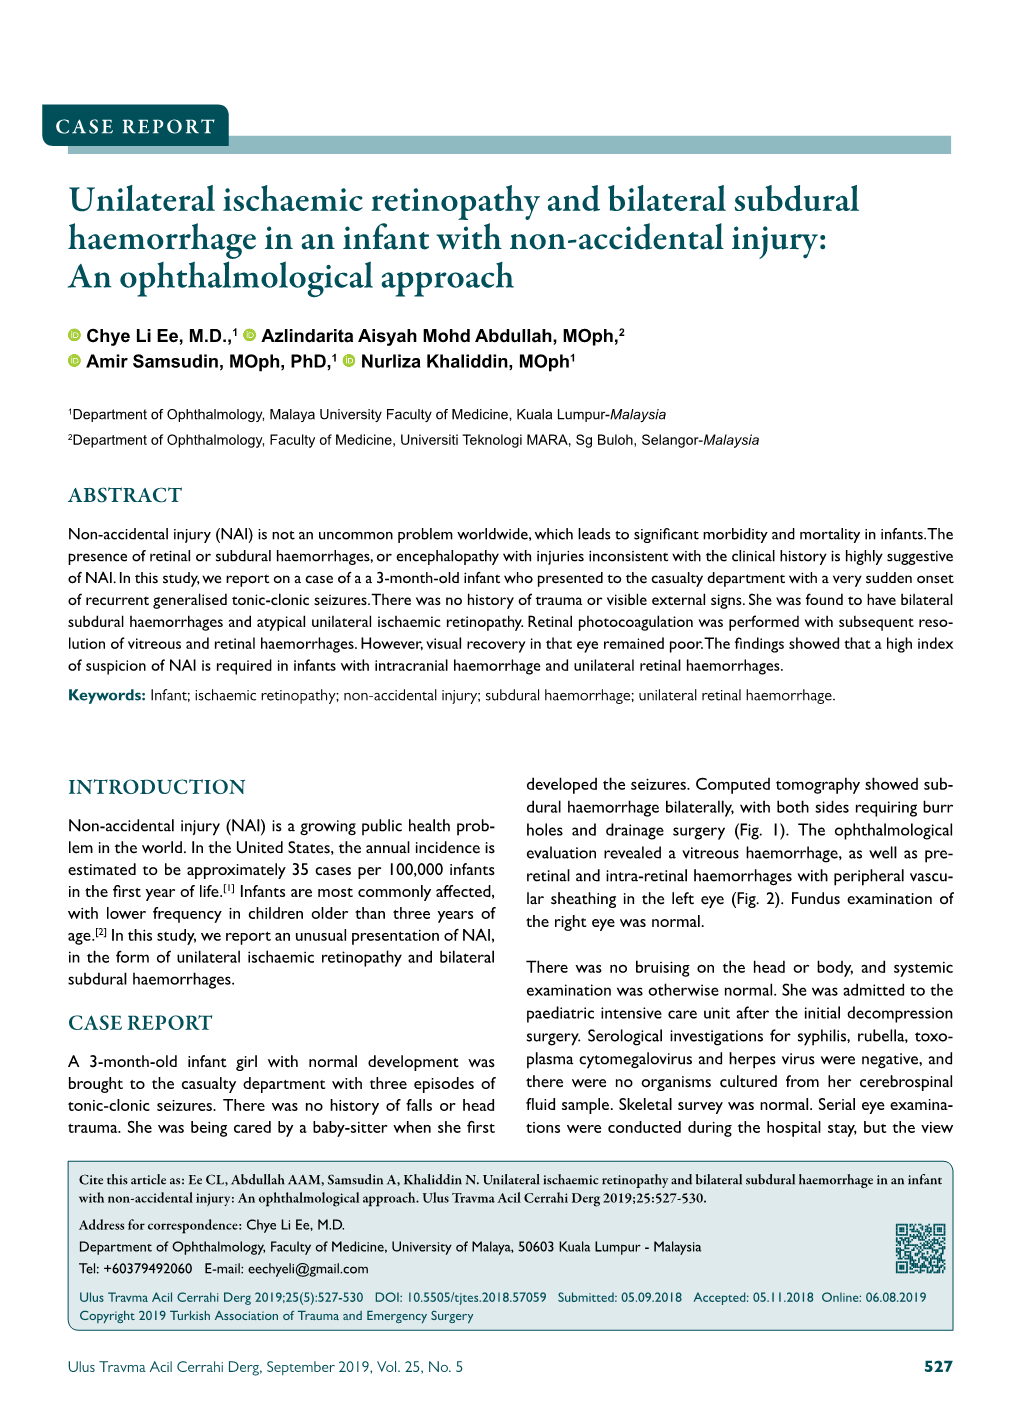 Unilateral Ischaemic Retinopathy and Bilateral Subdural Haemorrhage in an Infant with Non-Accidental Injury: an Ophthalmological Approach